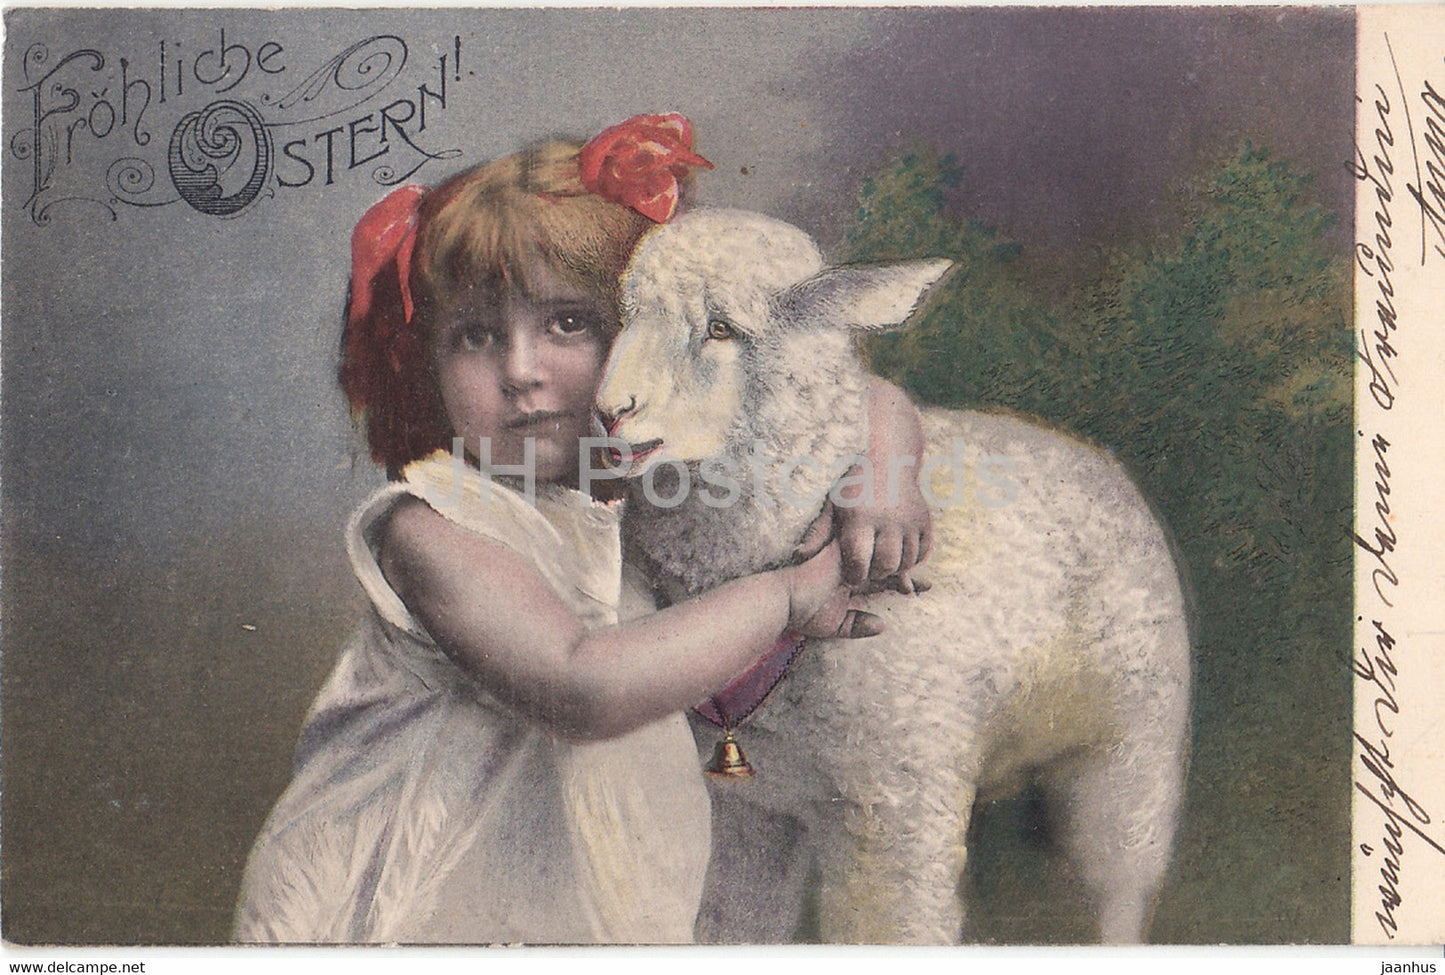 Easter Greeting Card - Frohliche Ostern - girl - sheep - Serie 3458 - old postcard - Germany - used - JH Postcards